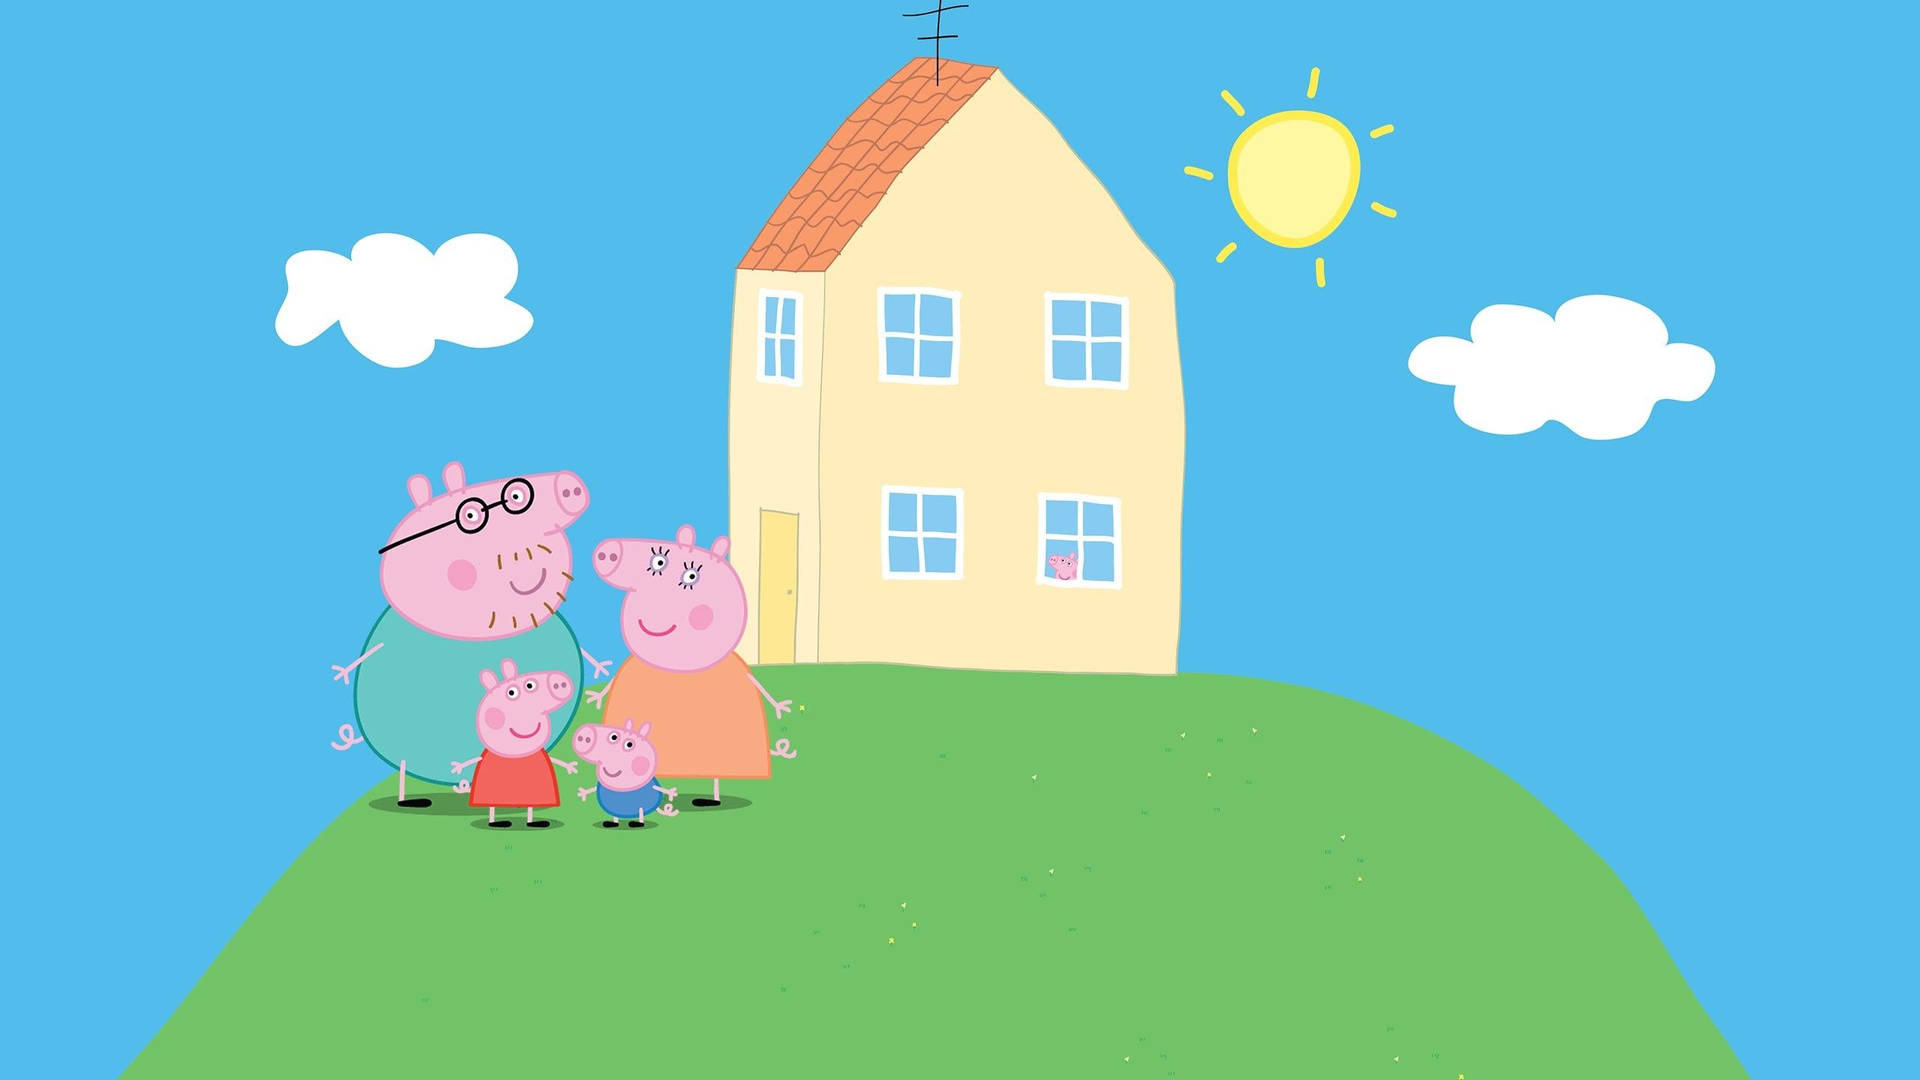 Peppa Pig and her family enjoying a day of fun at the Pig family house. Wallpaper